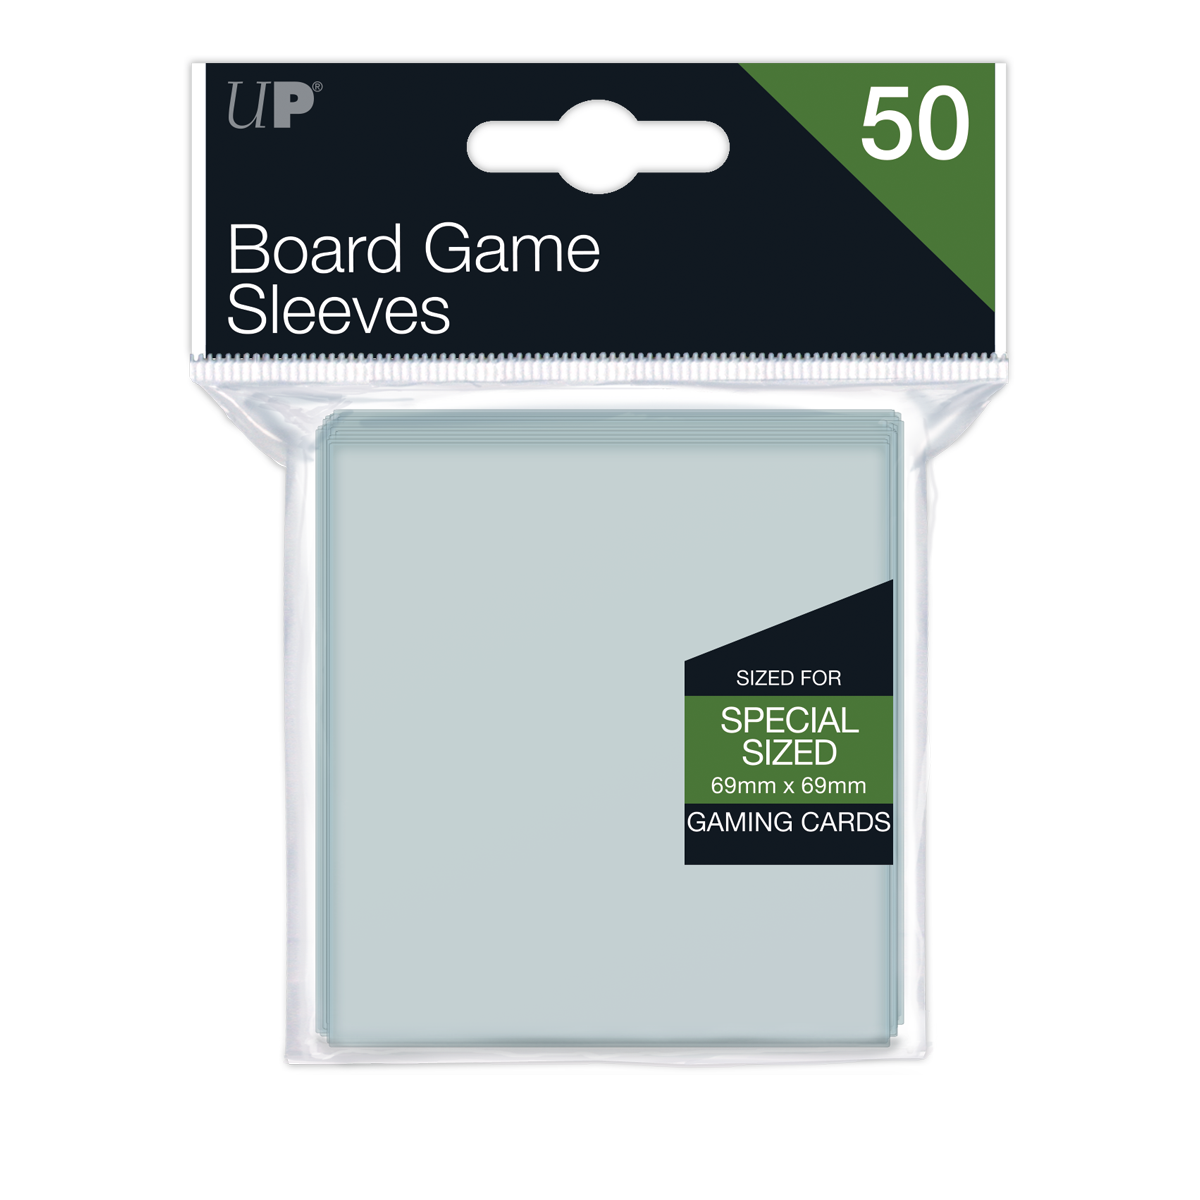 Special Sized Board Game Sleeves (50ct) for 69mm x 69mm Cards | Ultra PRO International